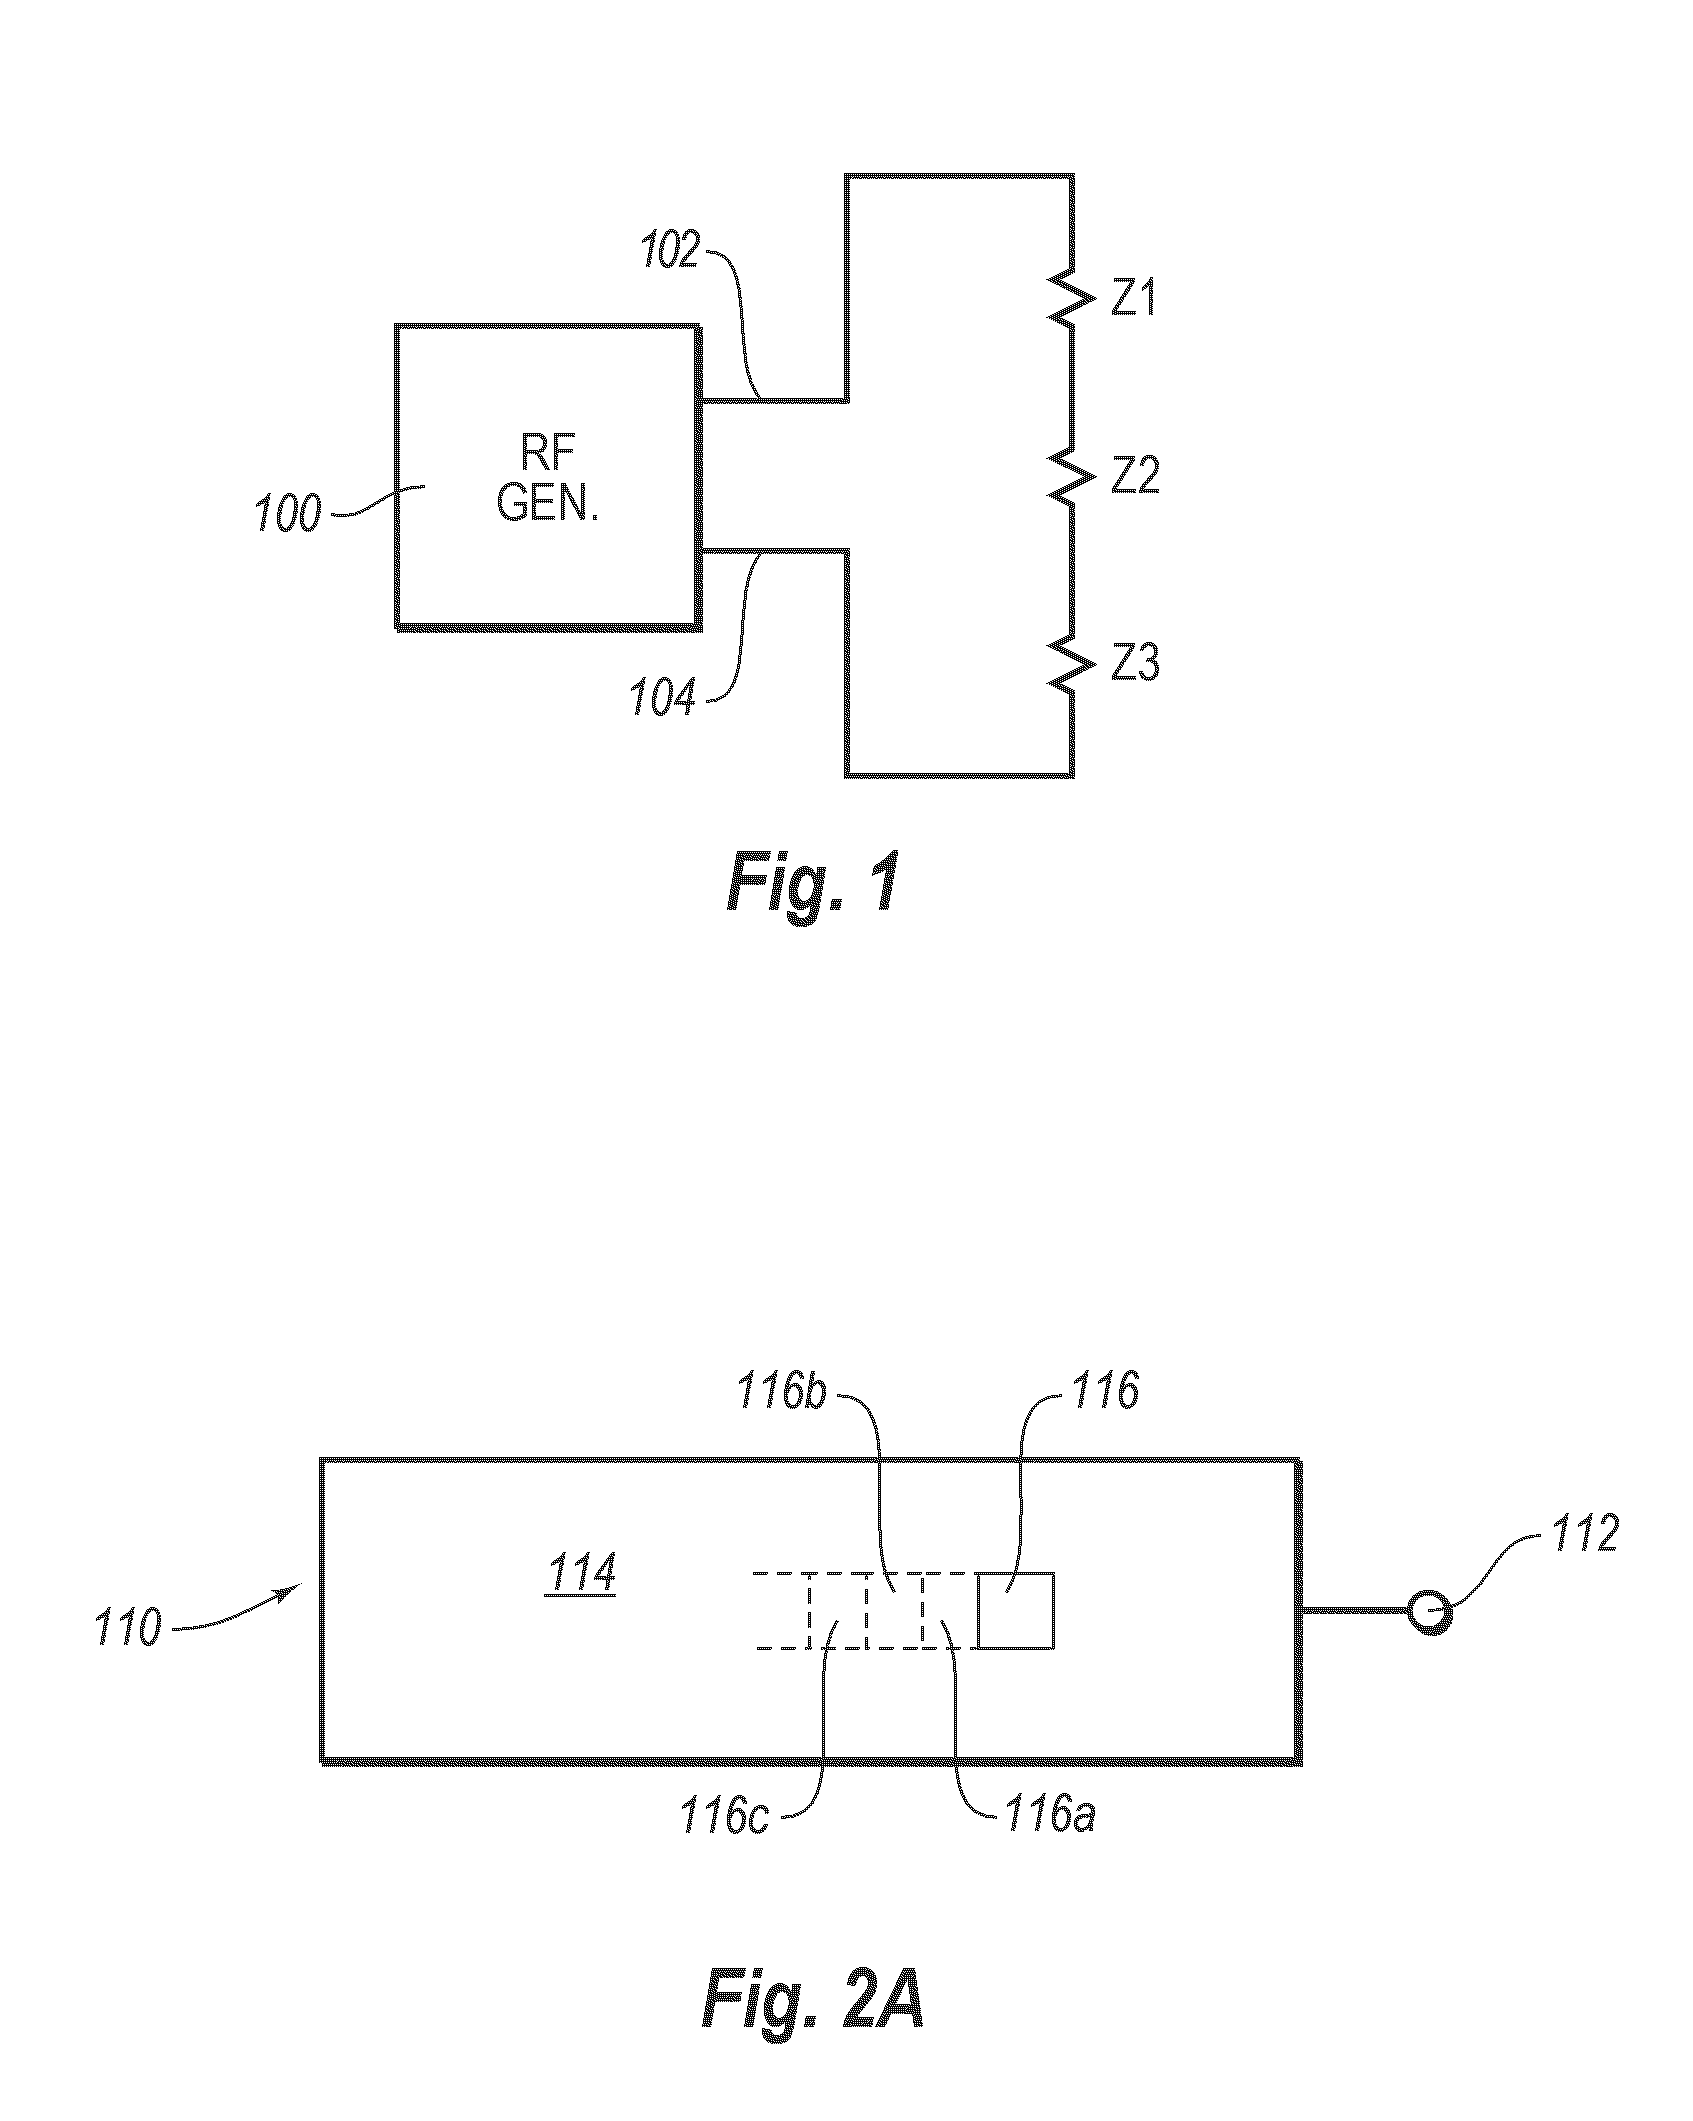 Self-limiting electrosurgical return electrode with pressure sore reduction and heating capabilities